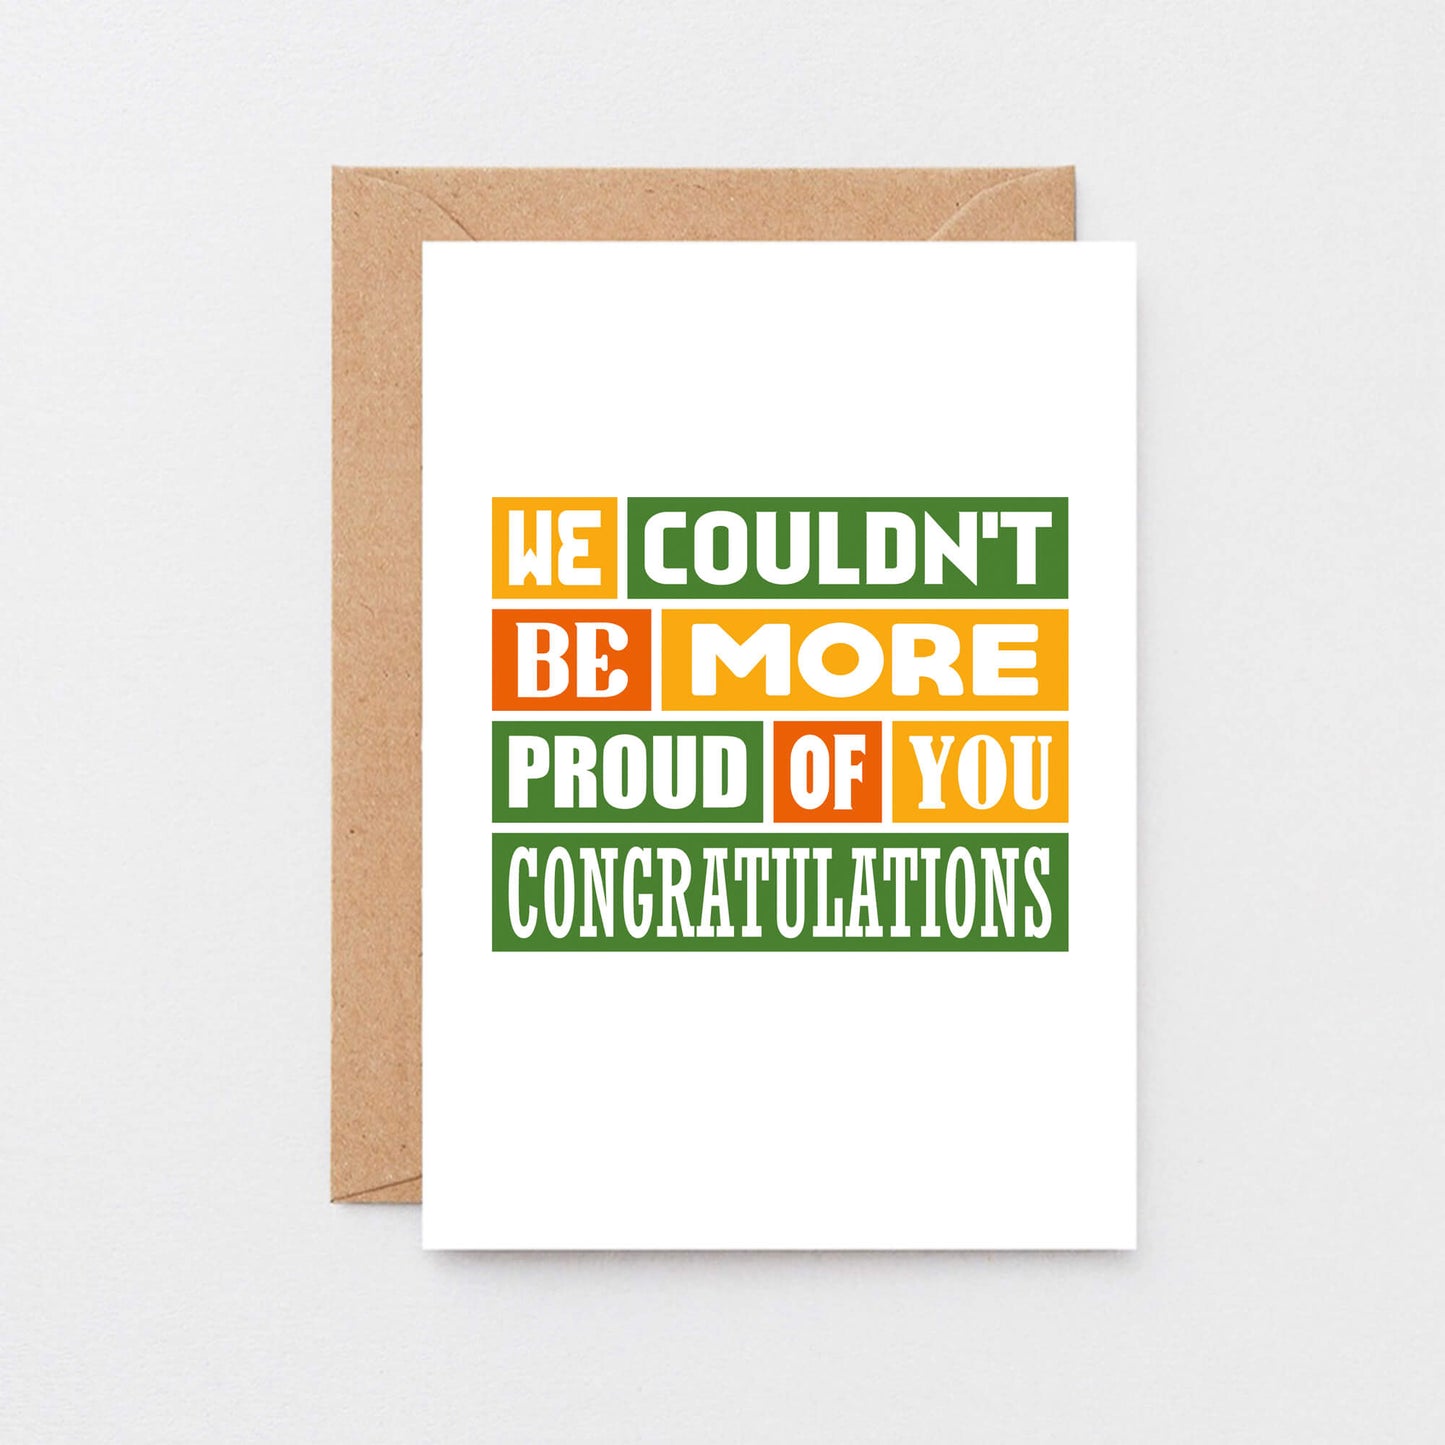 Congratulations Card by SixElevenCreations. Reads We couldn't be more proud of you. Congratulations. Product Code SE0346A6